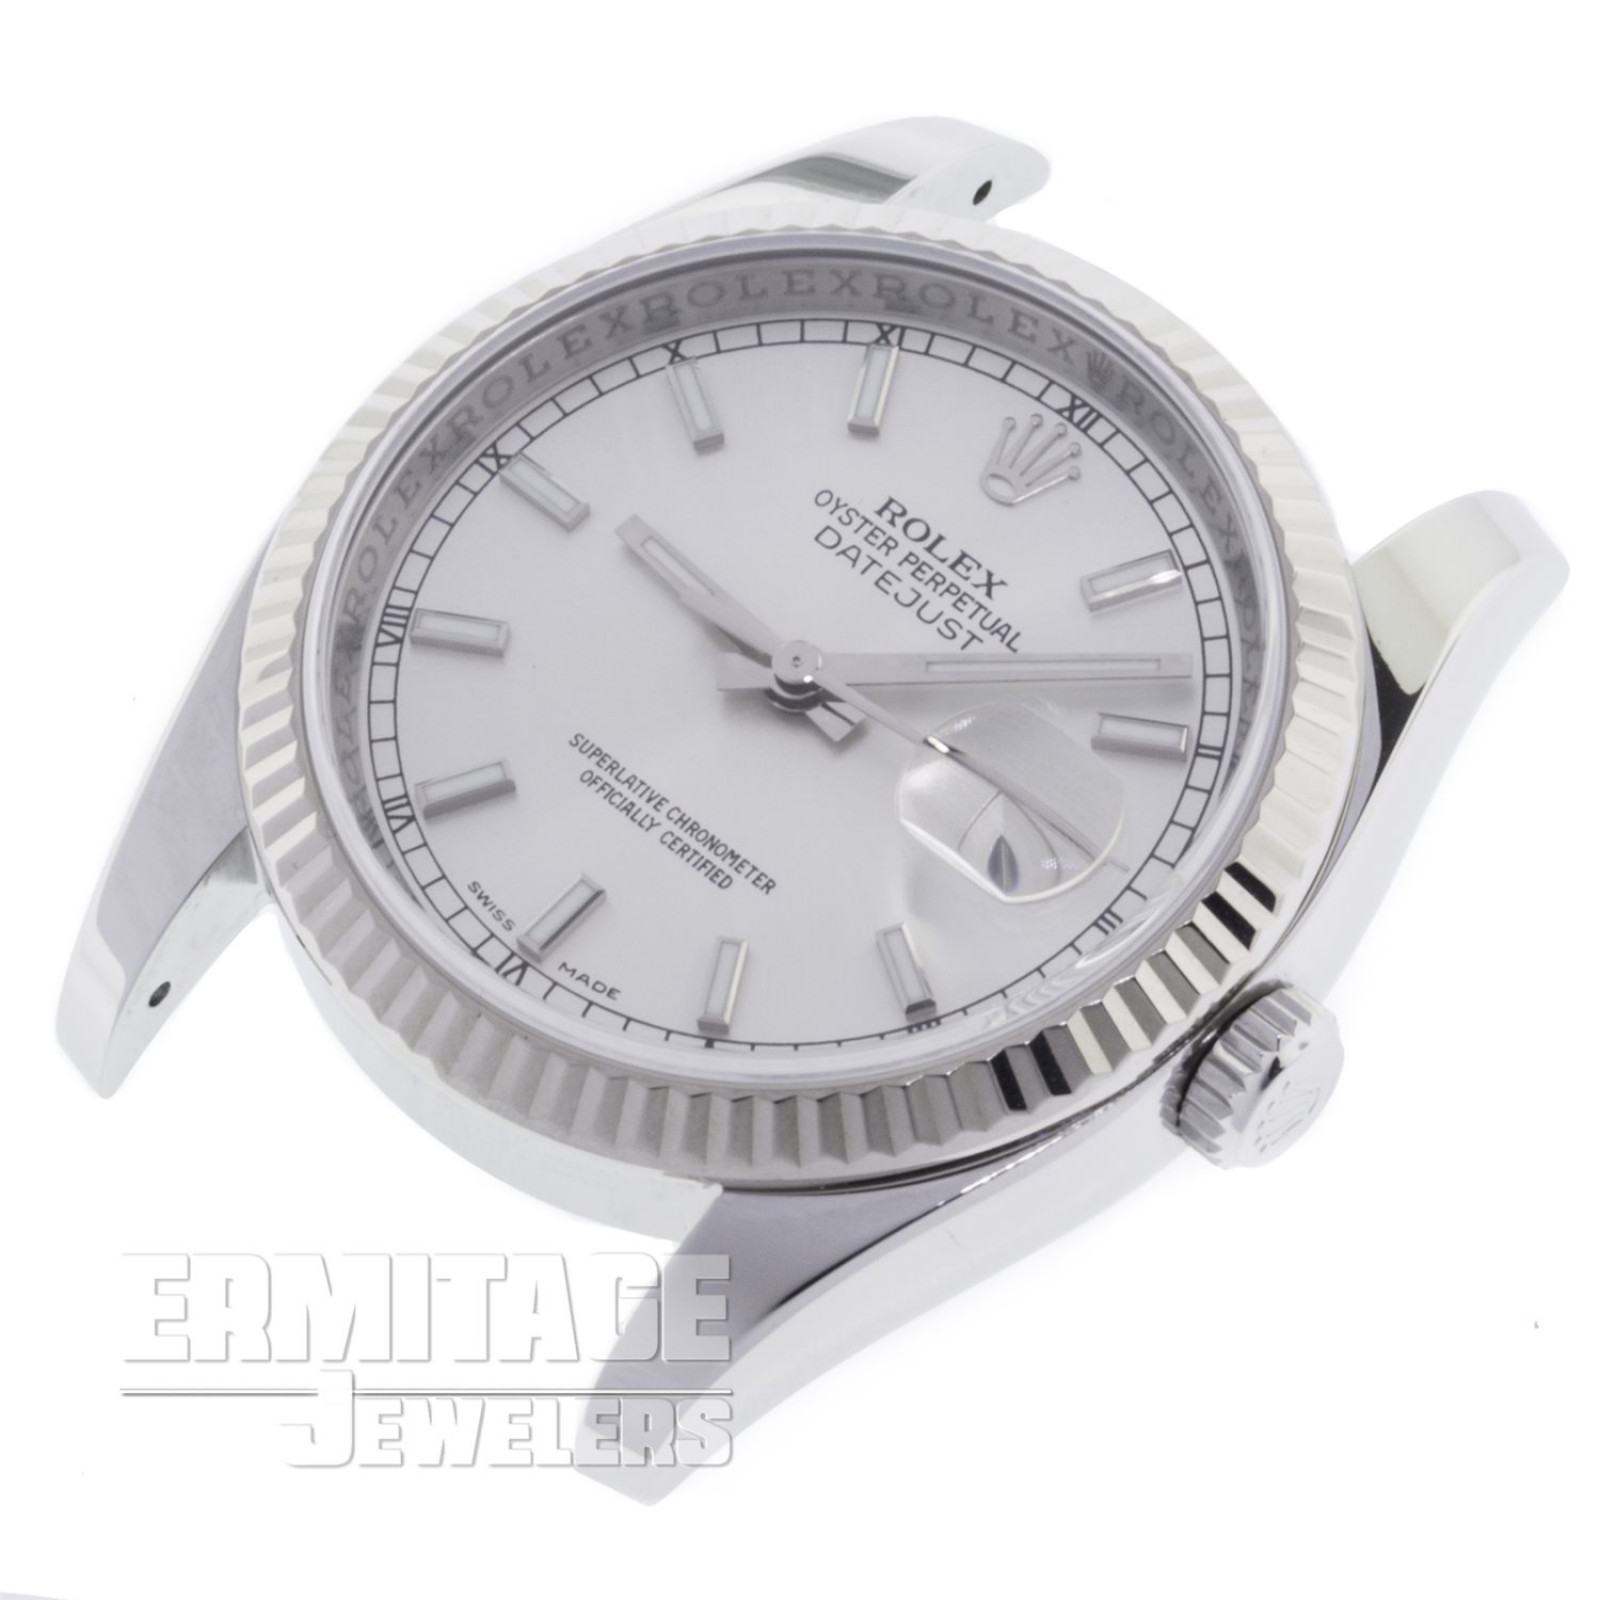 White Gold & Steel on Oyster Rolex Datejust 116234 36 mm